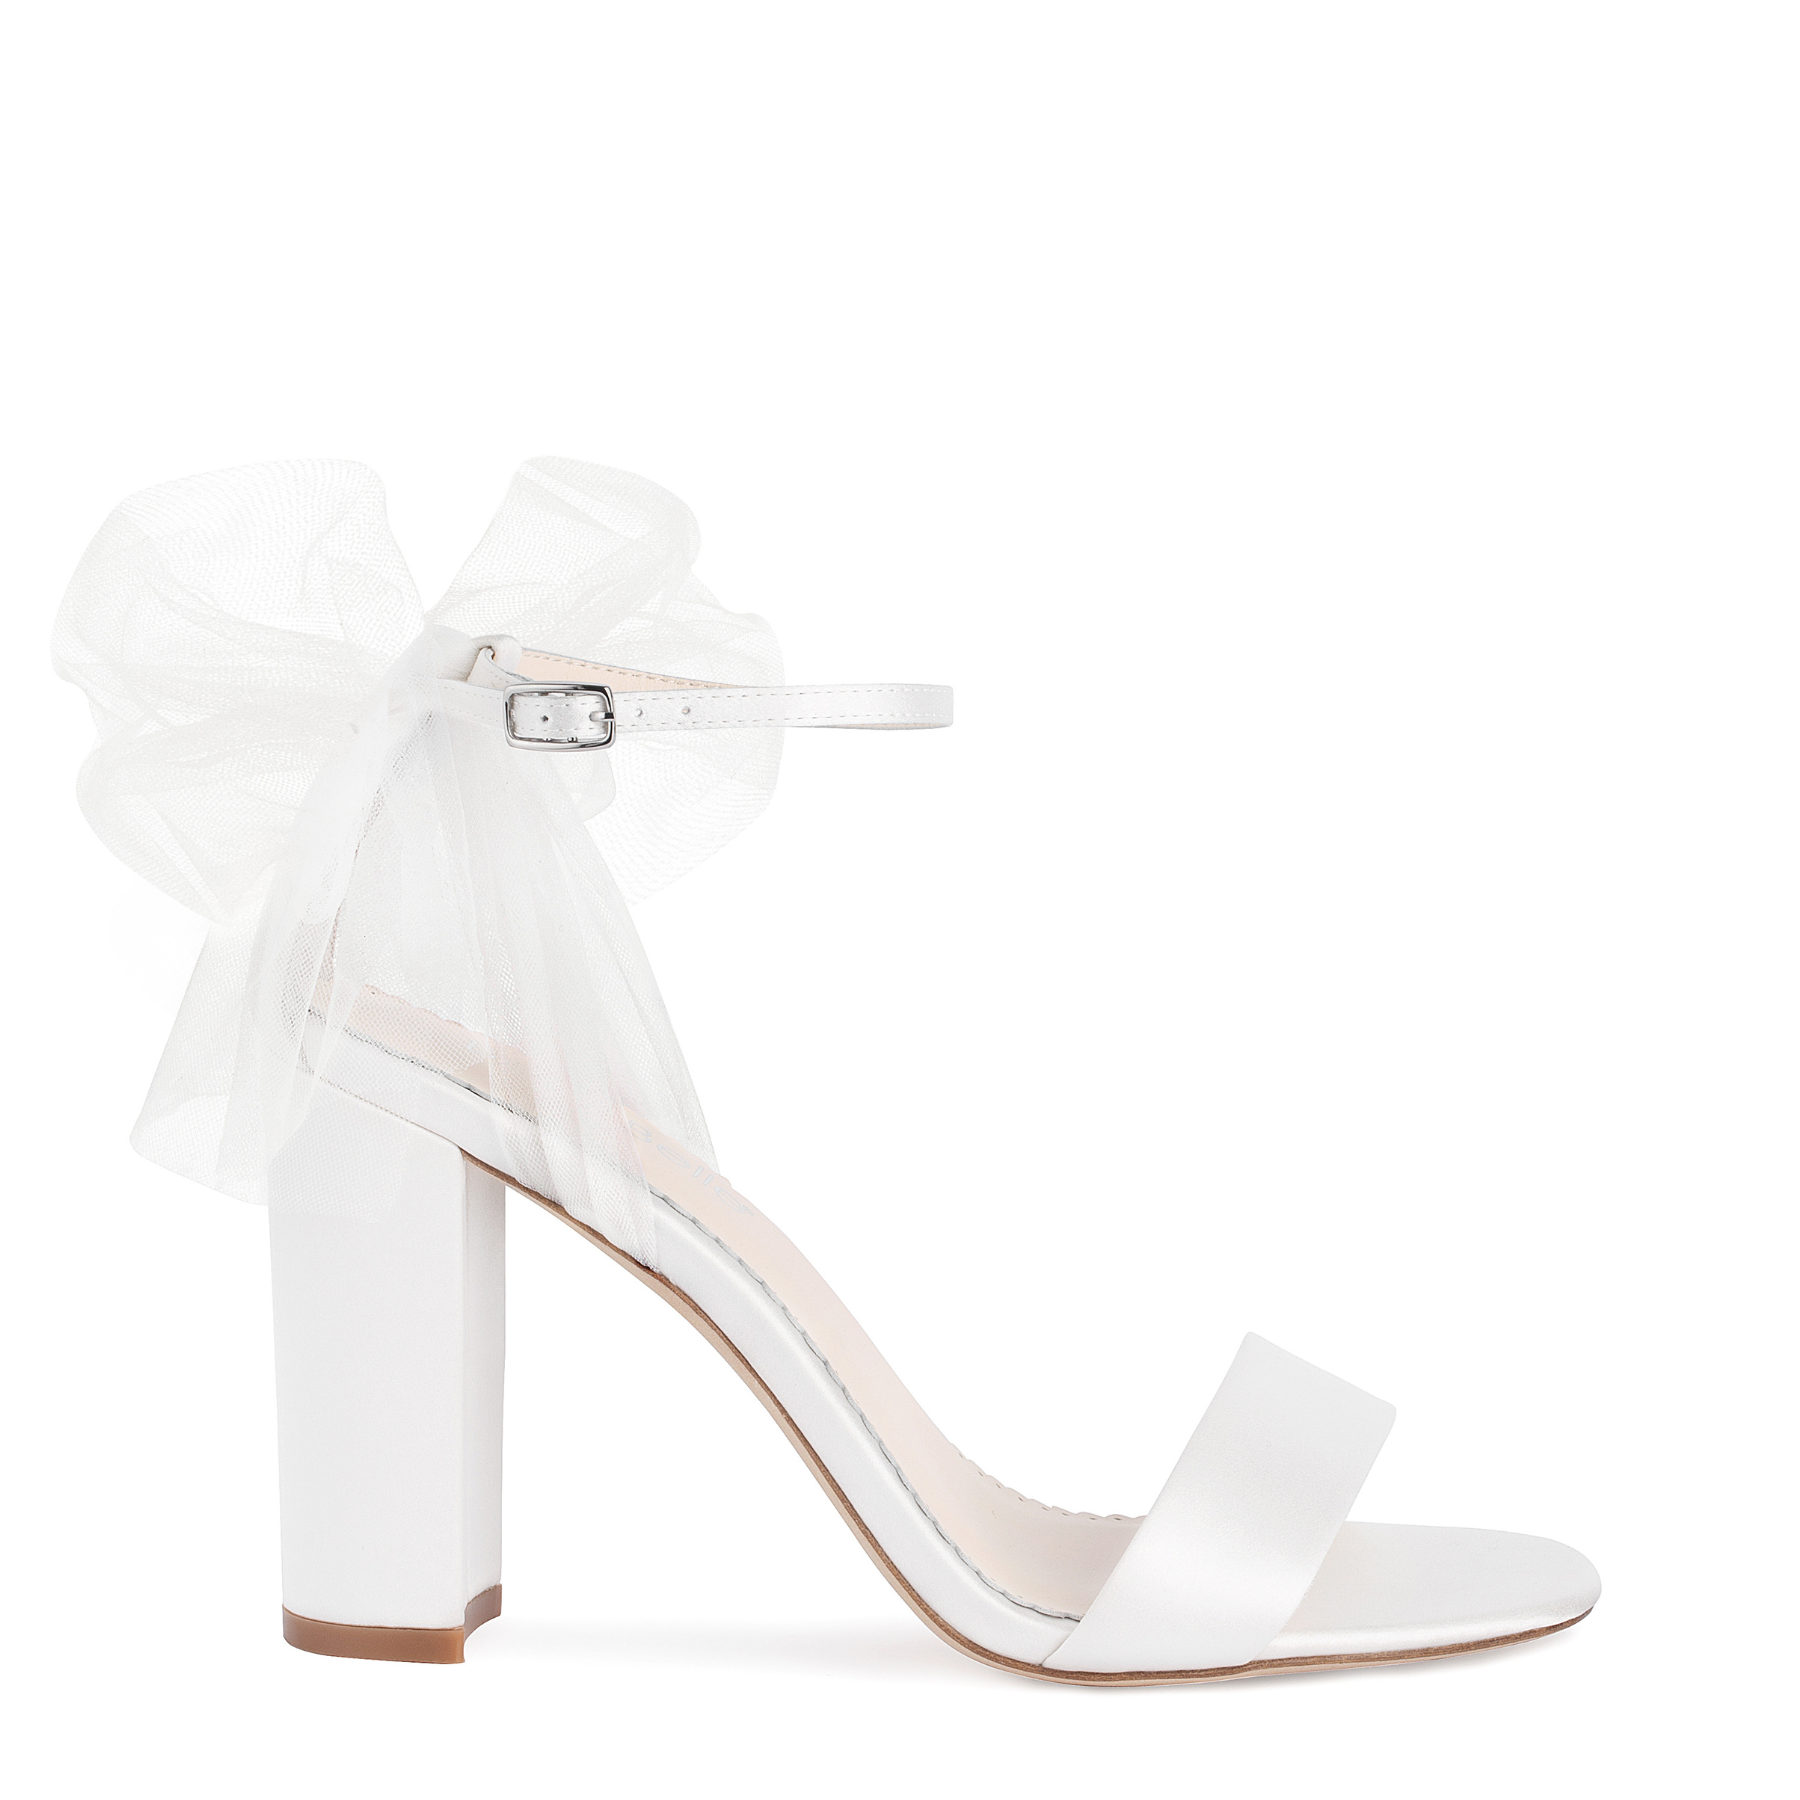 Womens Heeled Sandals Pleated Bow Knot Ankle Strap Open Toe High Block  Chunky Heels Sandals Dress Bridal Wedding Shoes Pumps - Walmart.com